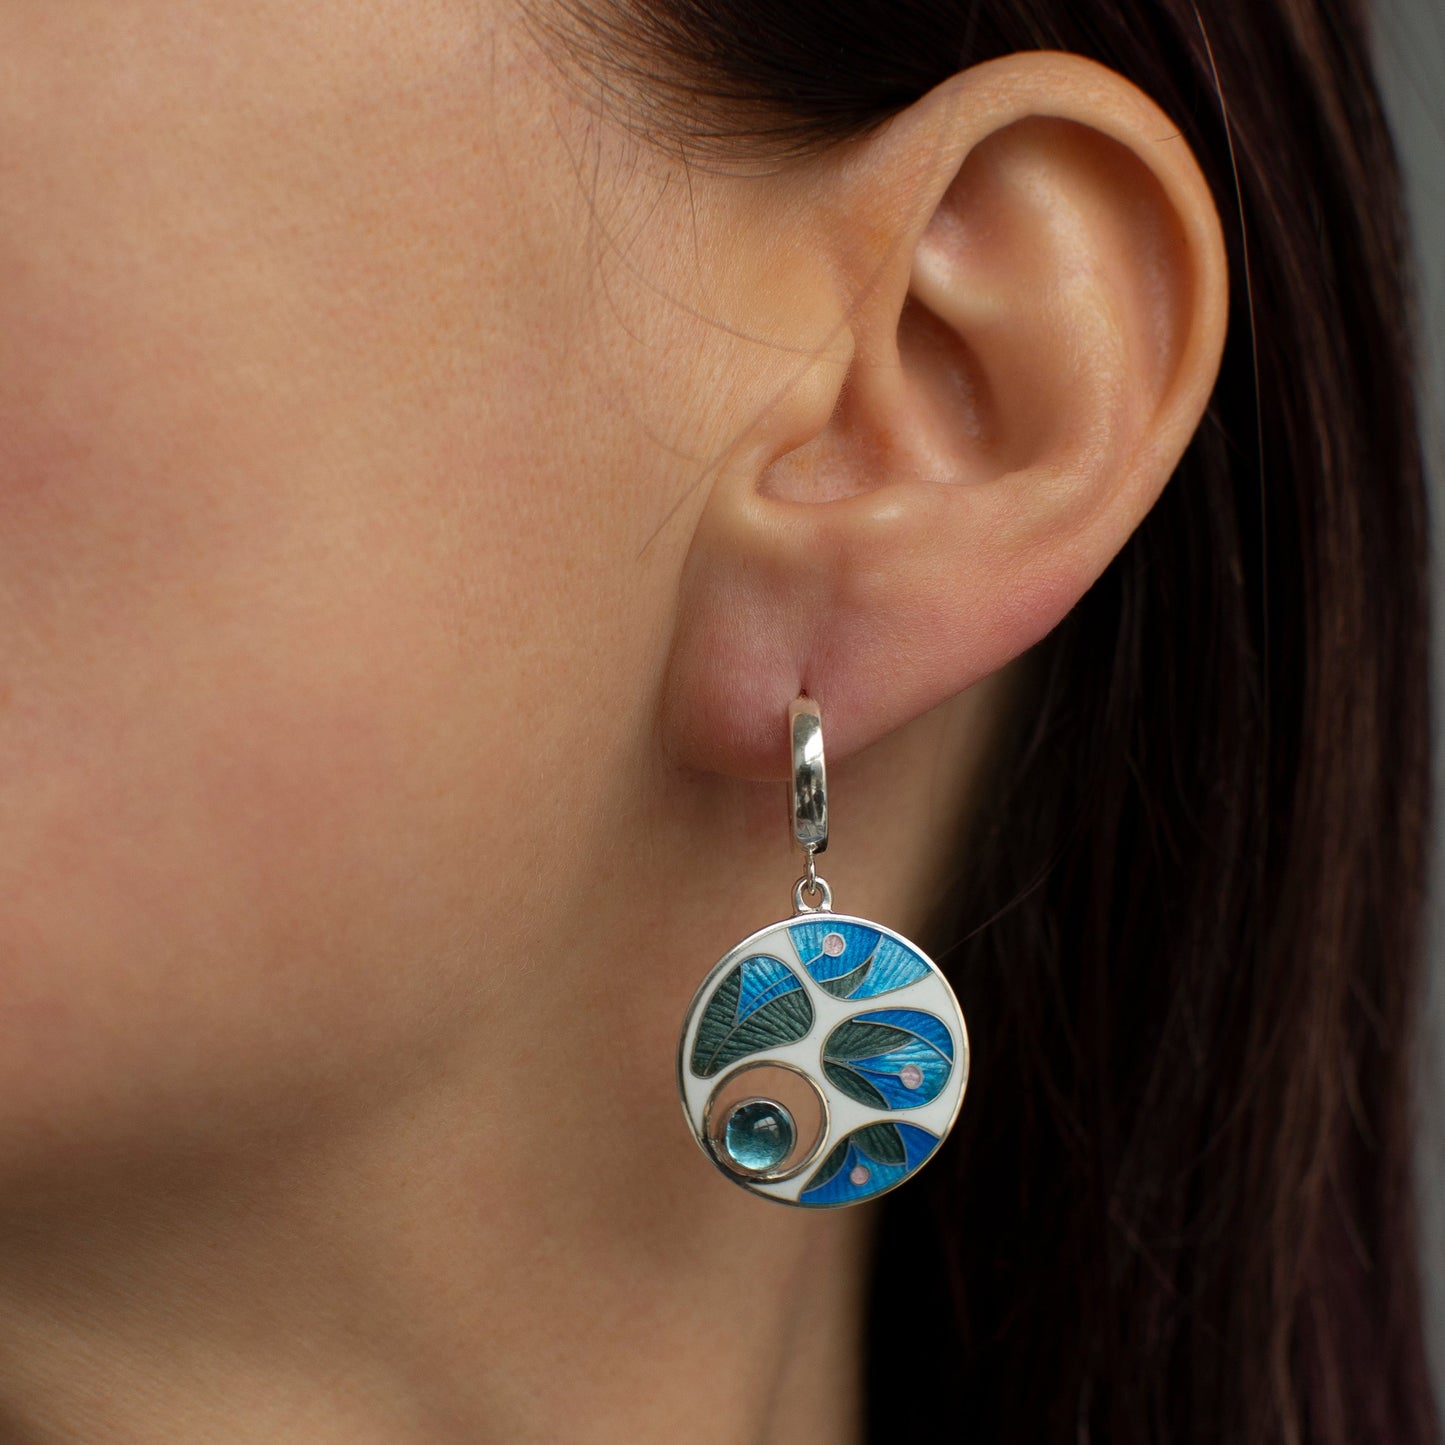 Cloisonné Enamel And Sterling Silver Earrings With Topaz Gemstones